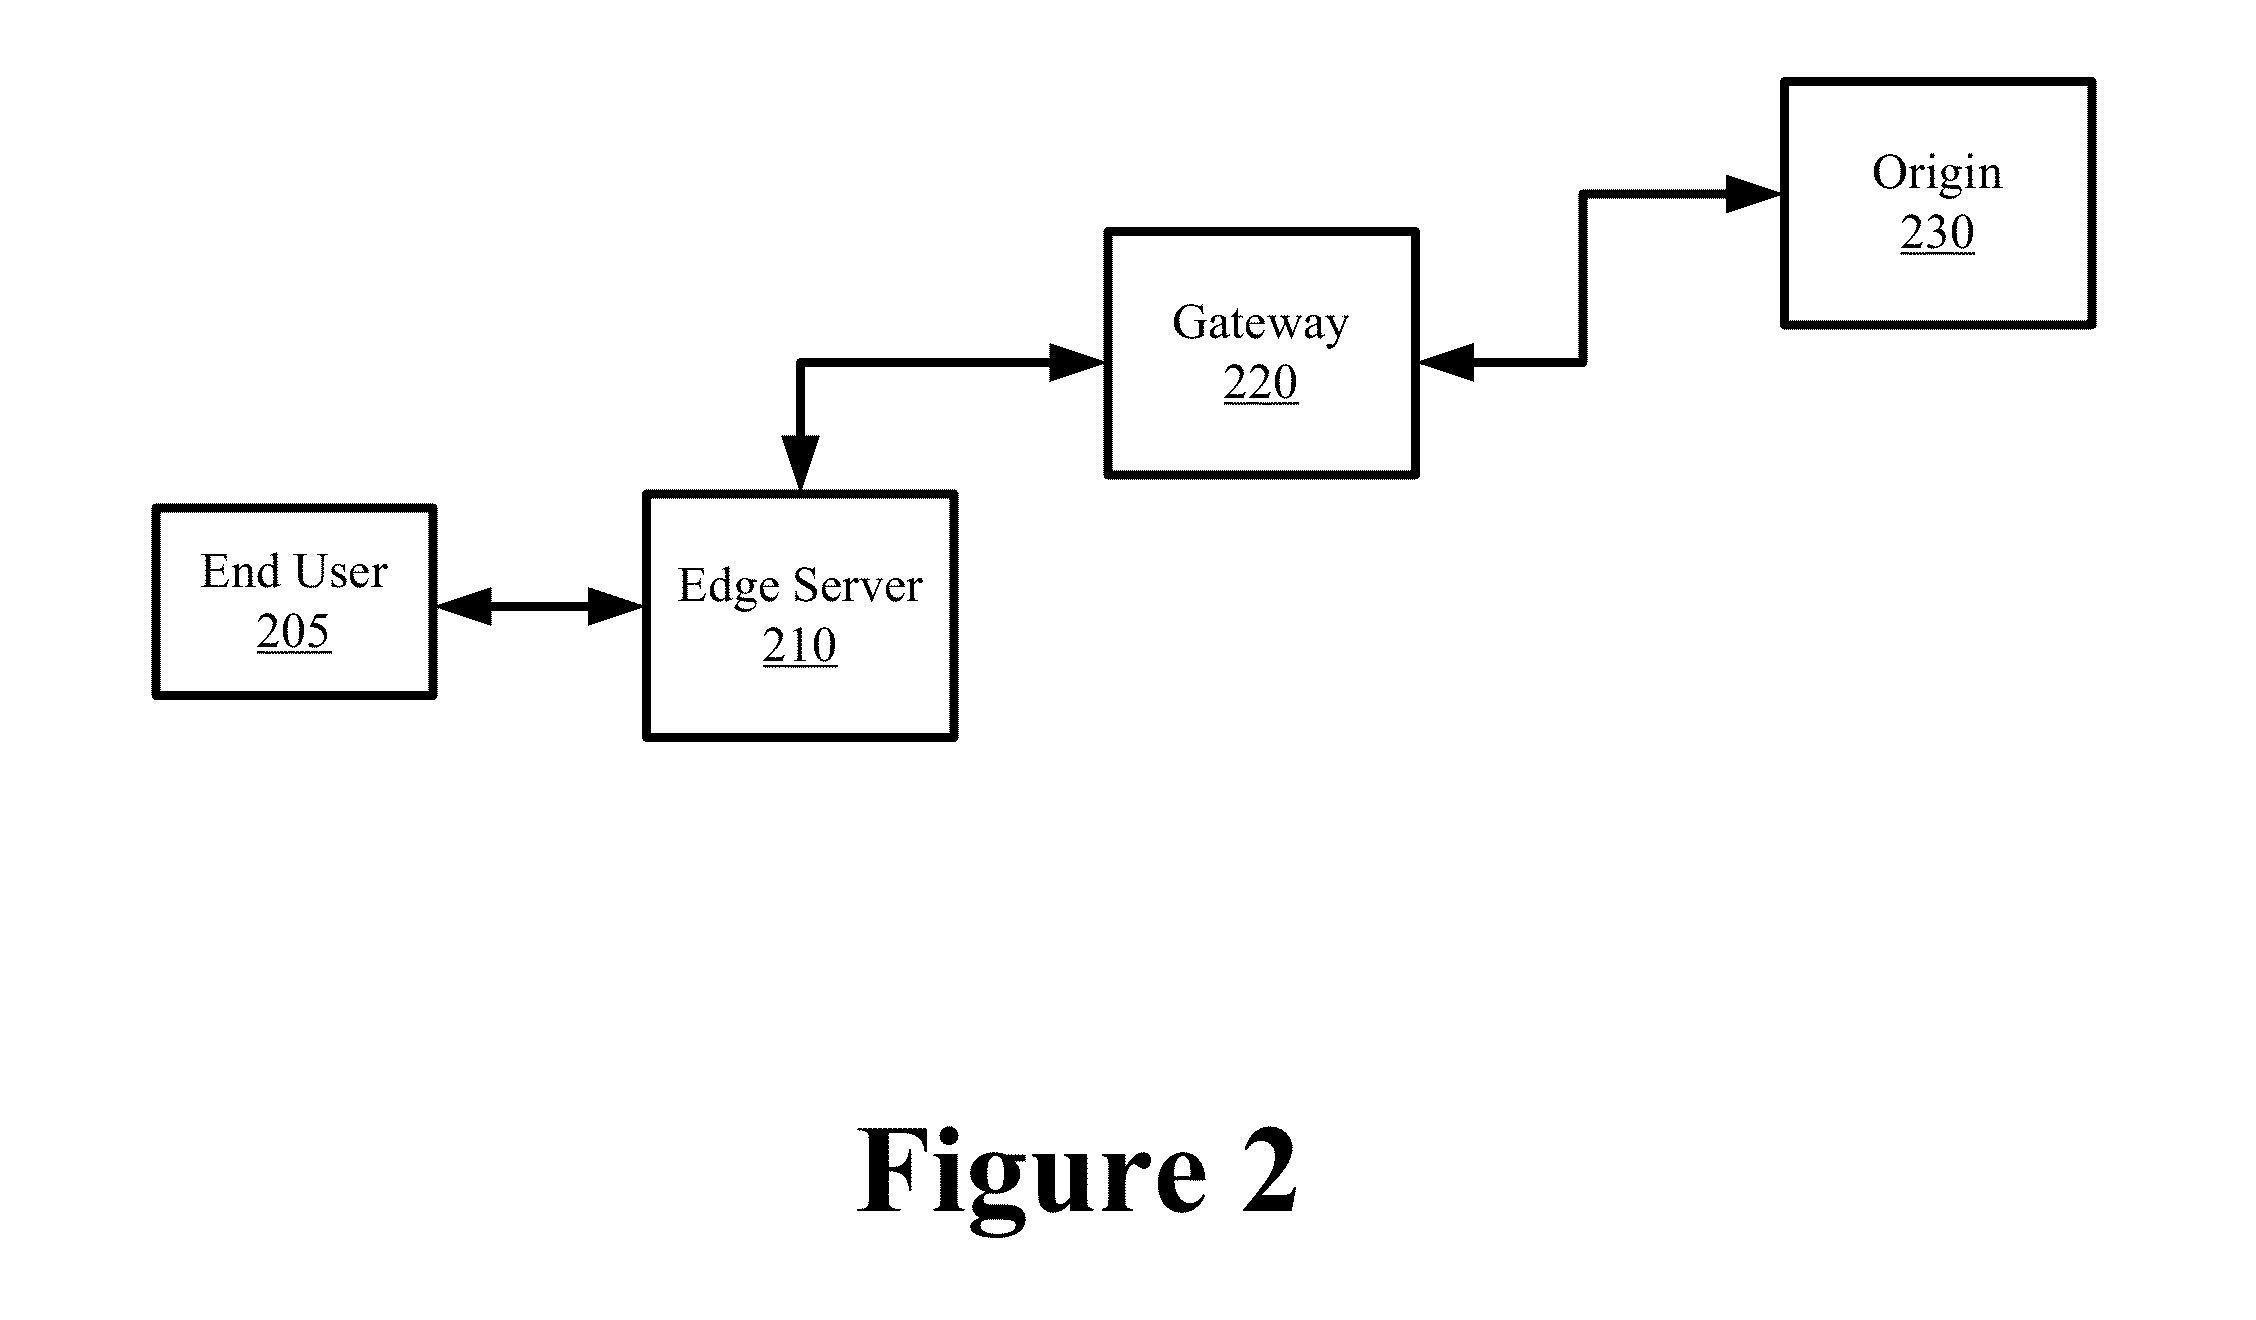 Efficient Cache Validation and Content Retrieval in a Content Delivery Network